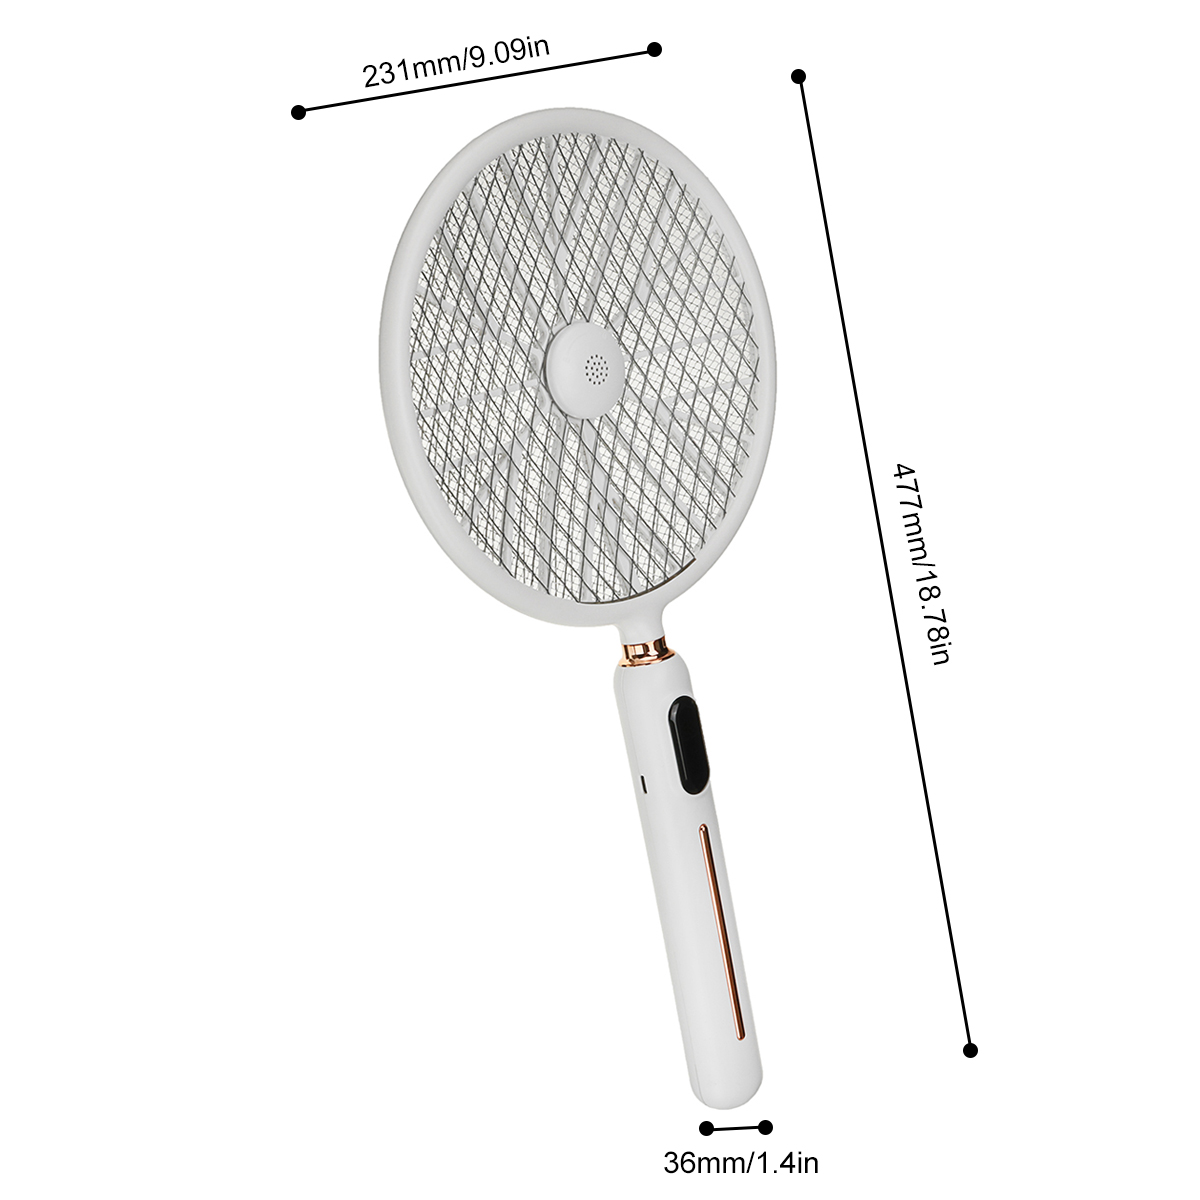 1200mAh-Mosquito-Killer-Lamp-Human-Body-Induction-Smart-Counting-Mosquito-Swatter-USB-Rechargable-LE-1937273-13